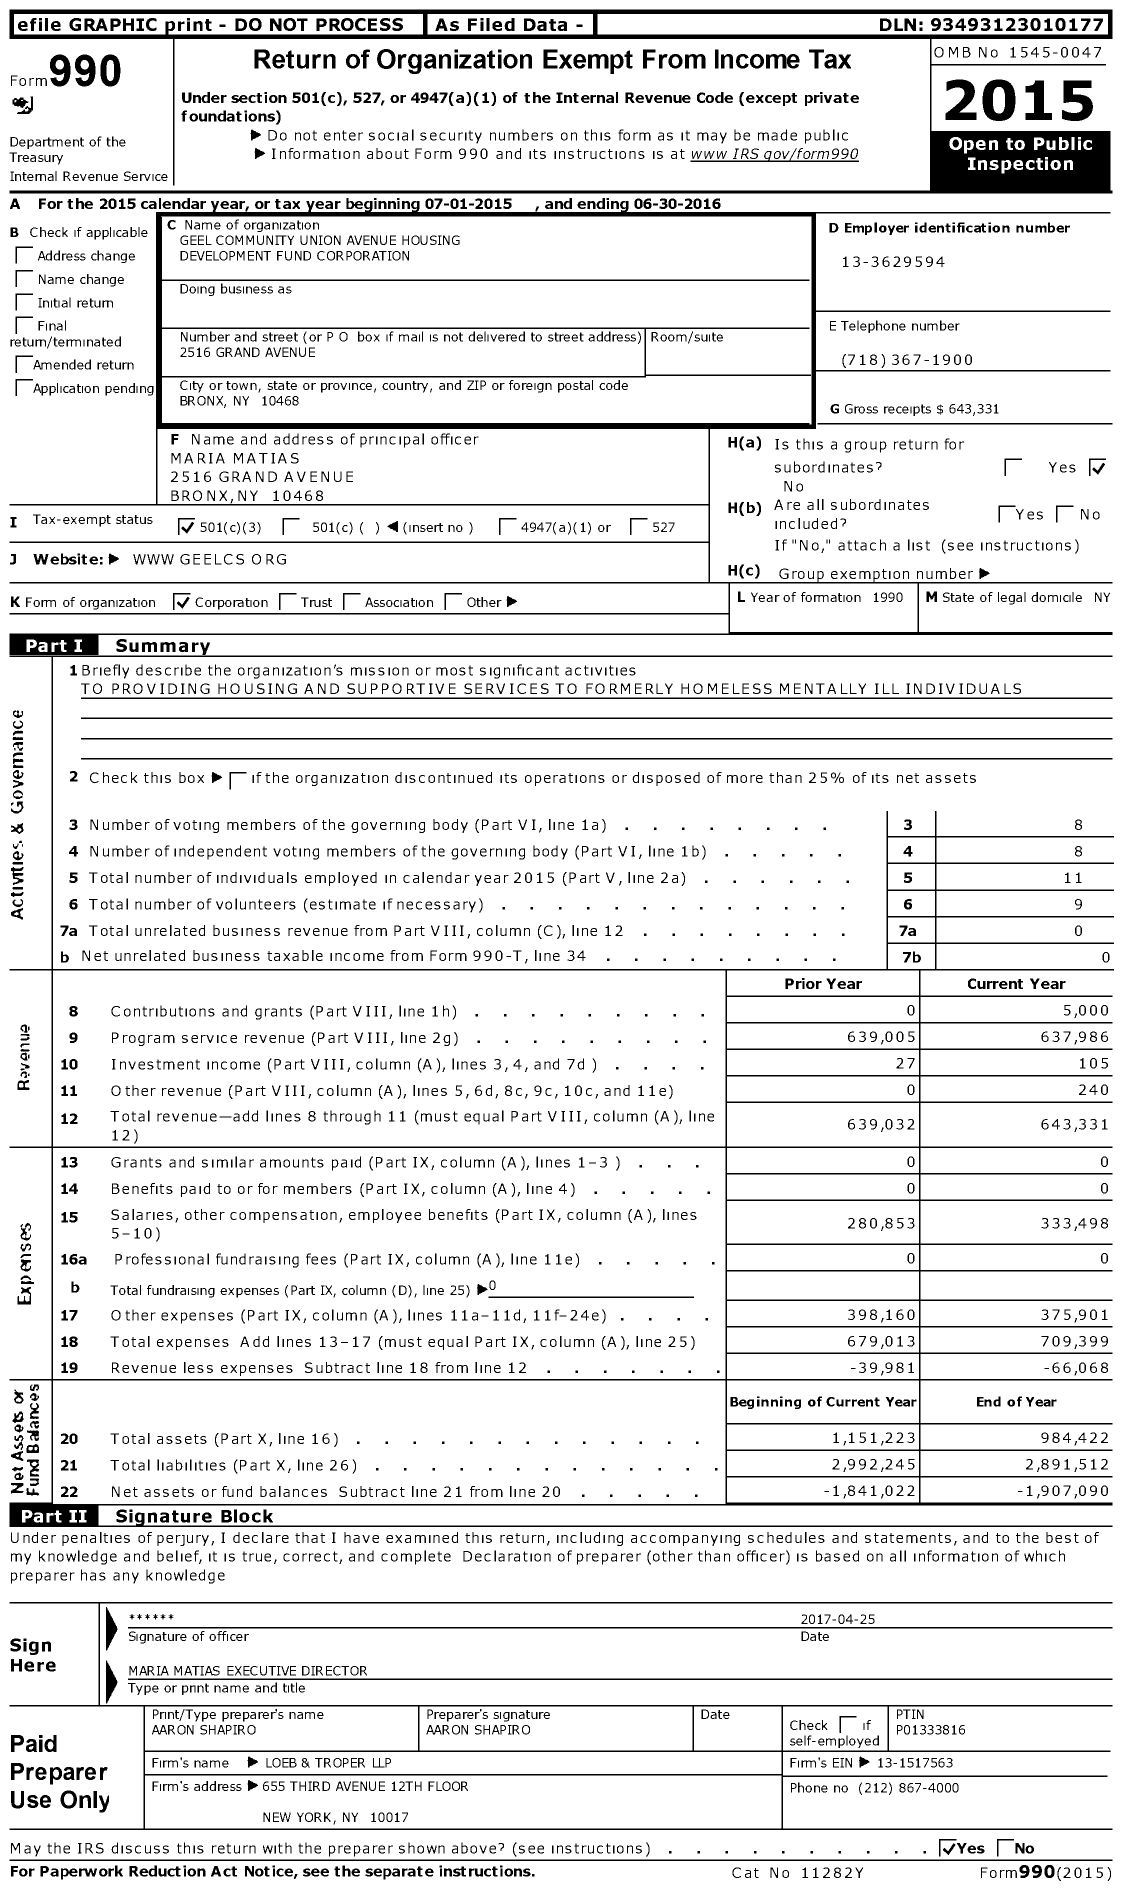 Image of first page of 2015 Form 990 for Geel Community Union Avenue Housing Development Fund Corporation